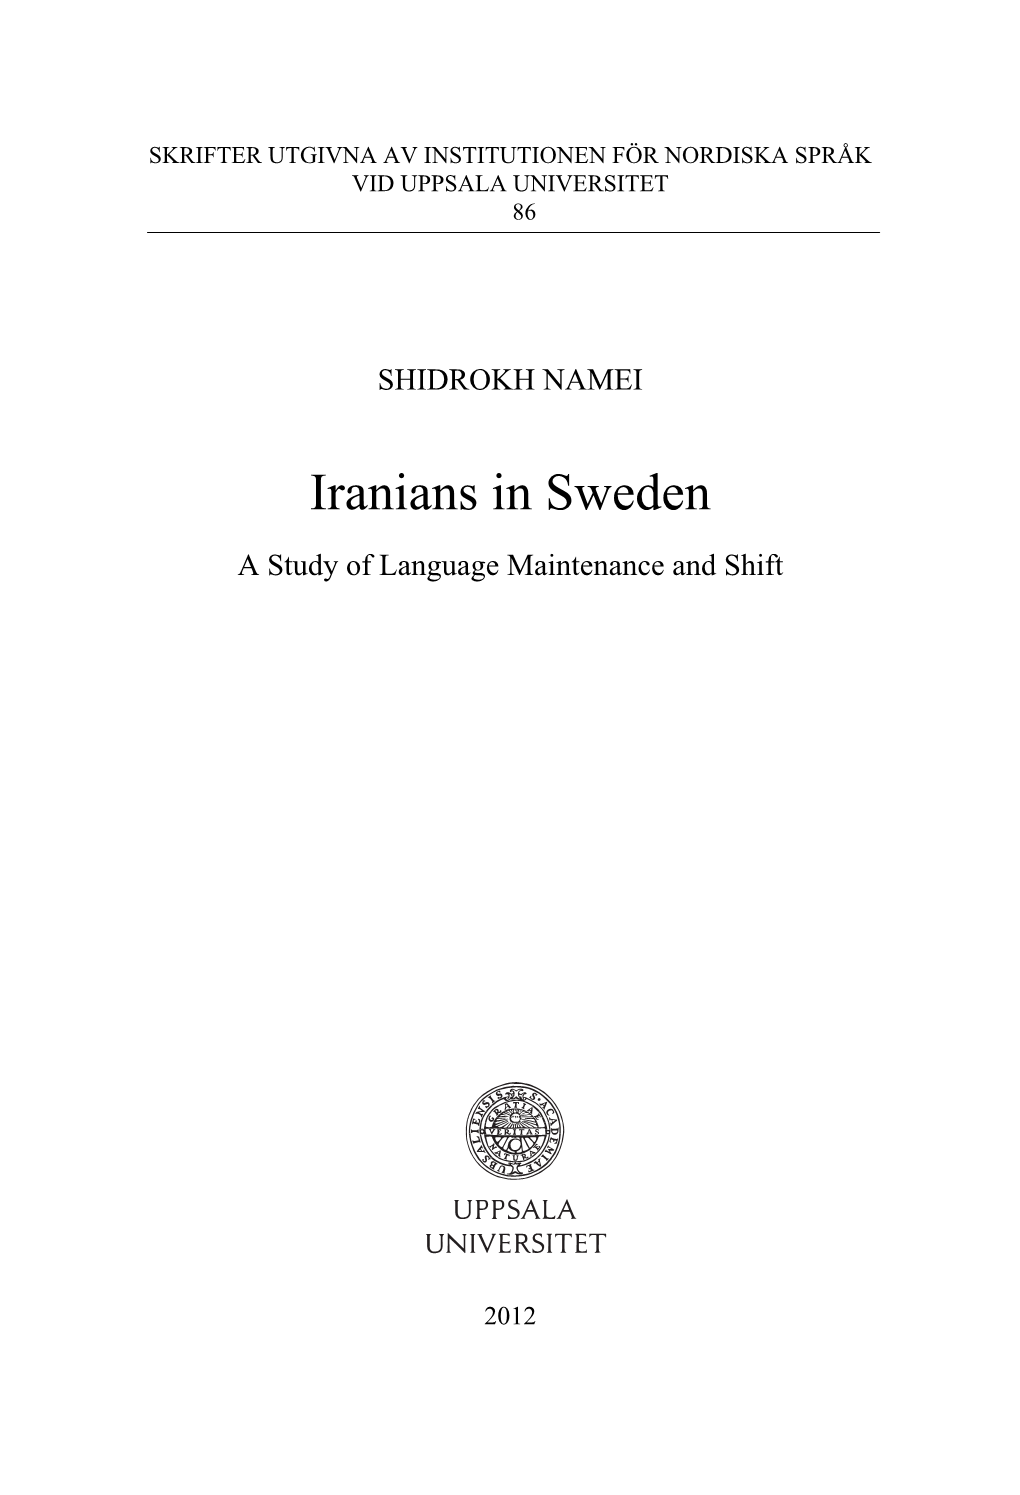 Iranians in Sweden: a Study of Language Maintenace and Shift